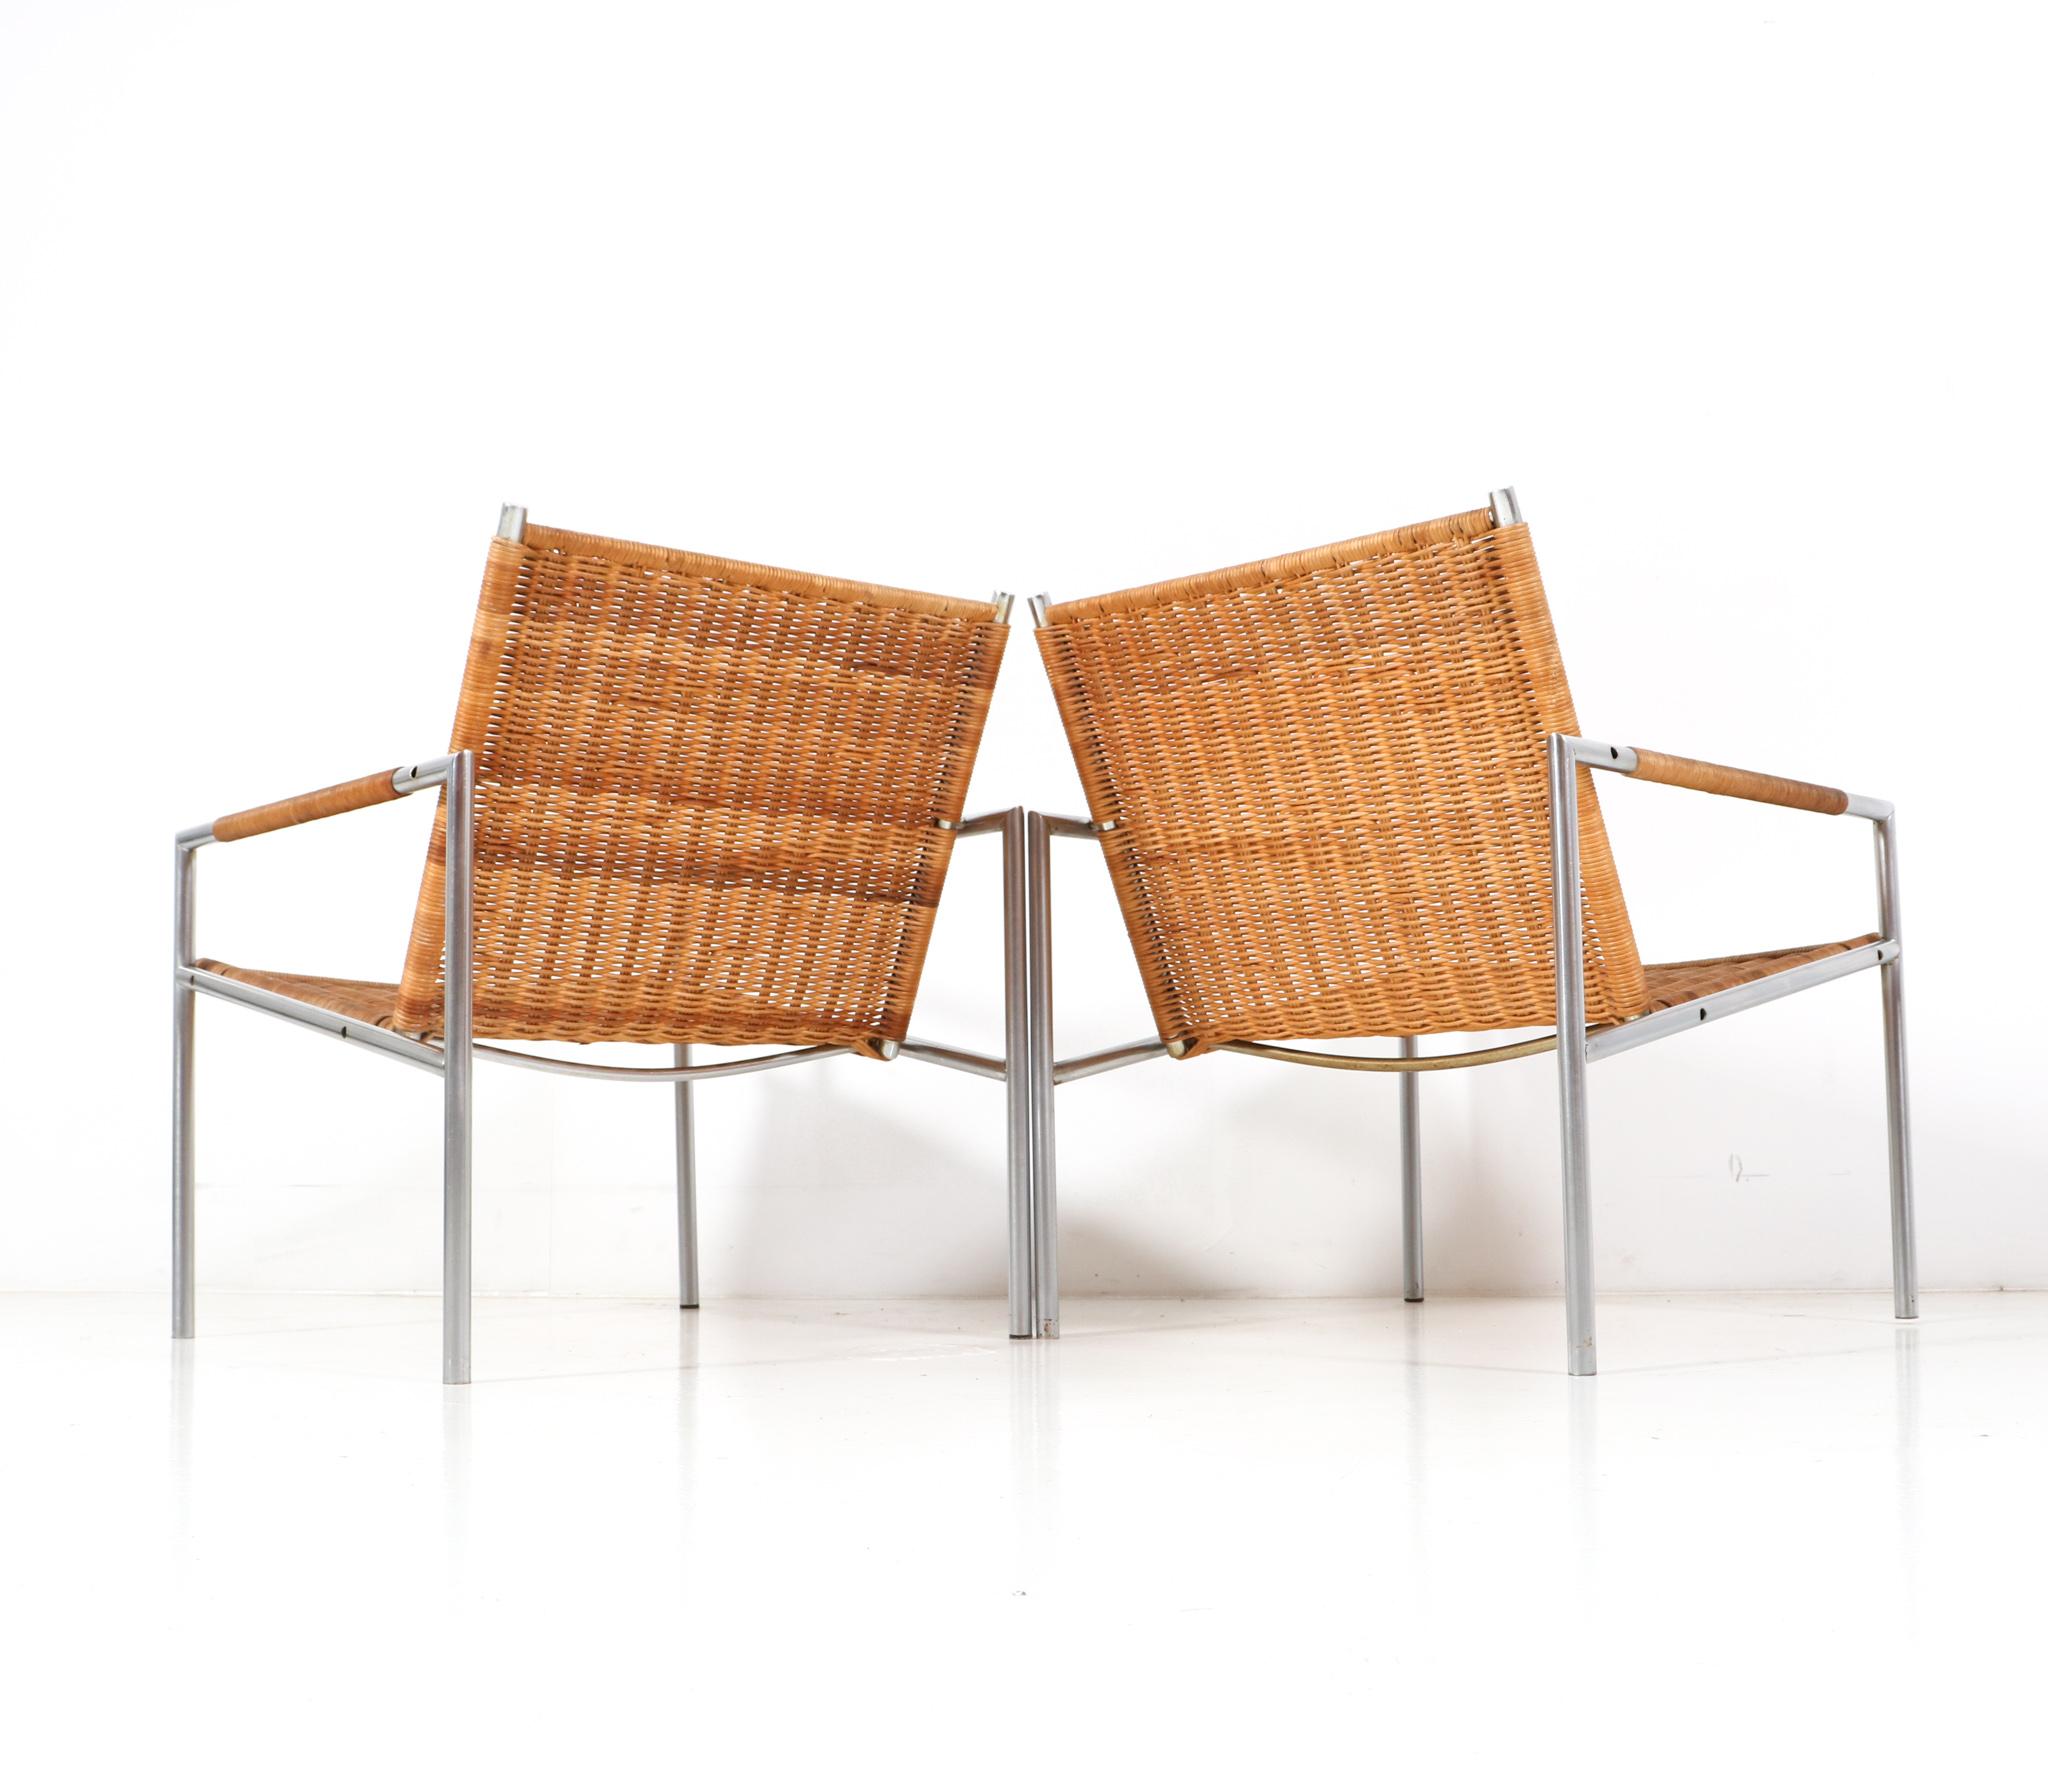 Two Mid-Century Modern SZ01 Lounge Chairs by Martin Visser for 'T Spectrum 2